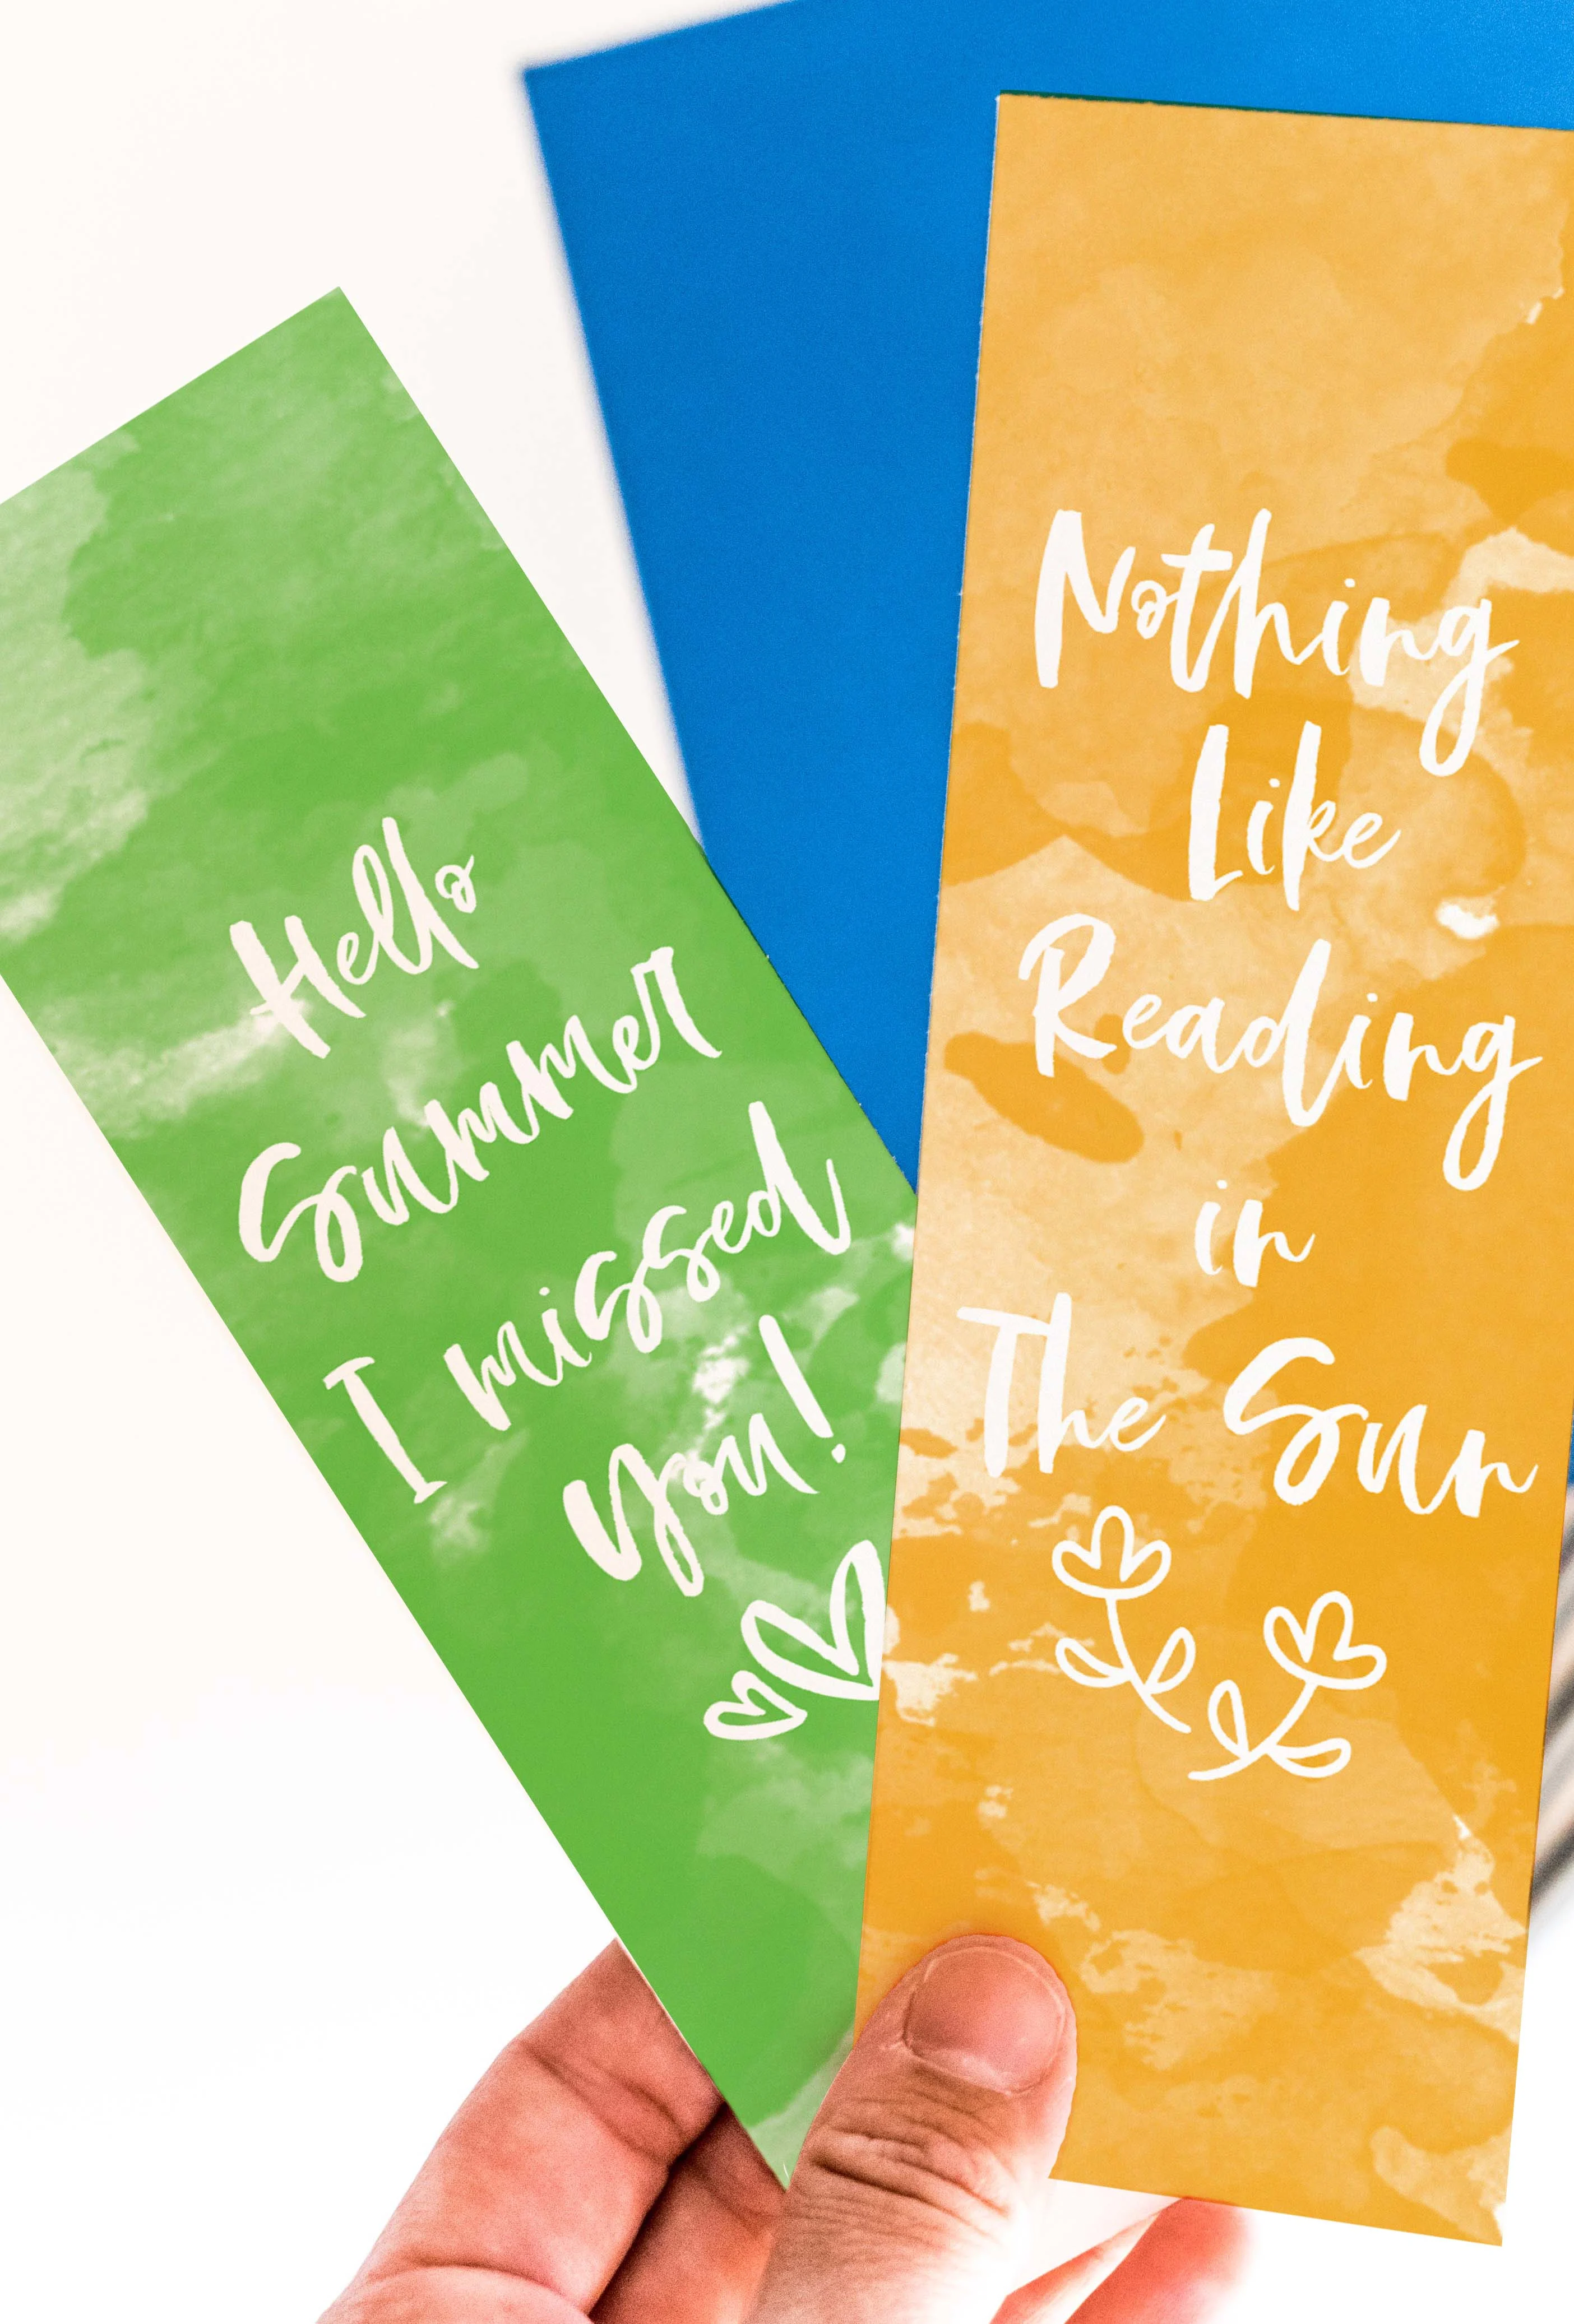 Get your books ready for summer with these adorable Free Watercolor Summer Bookmarks! After all, there's nothing better than reading a book under the sun!